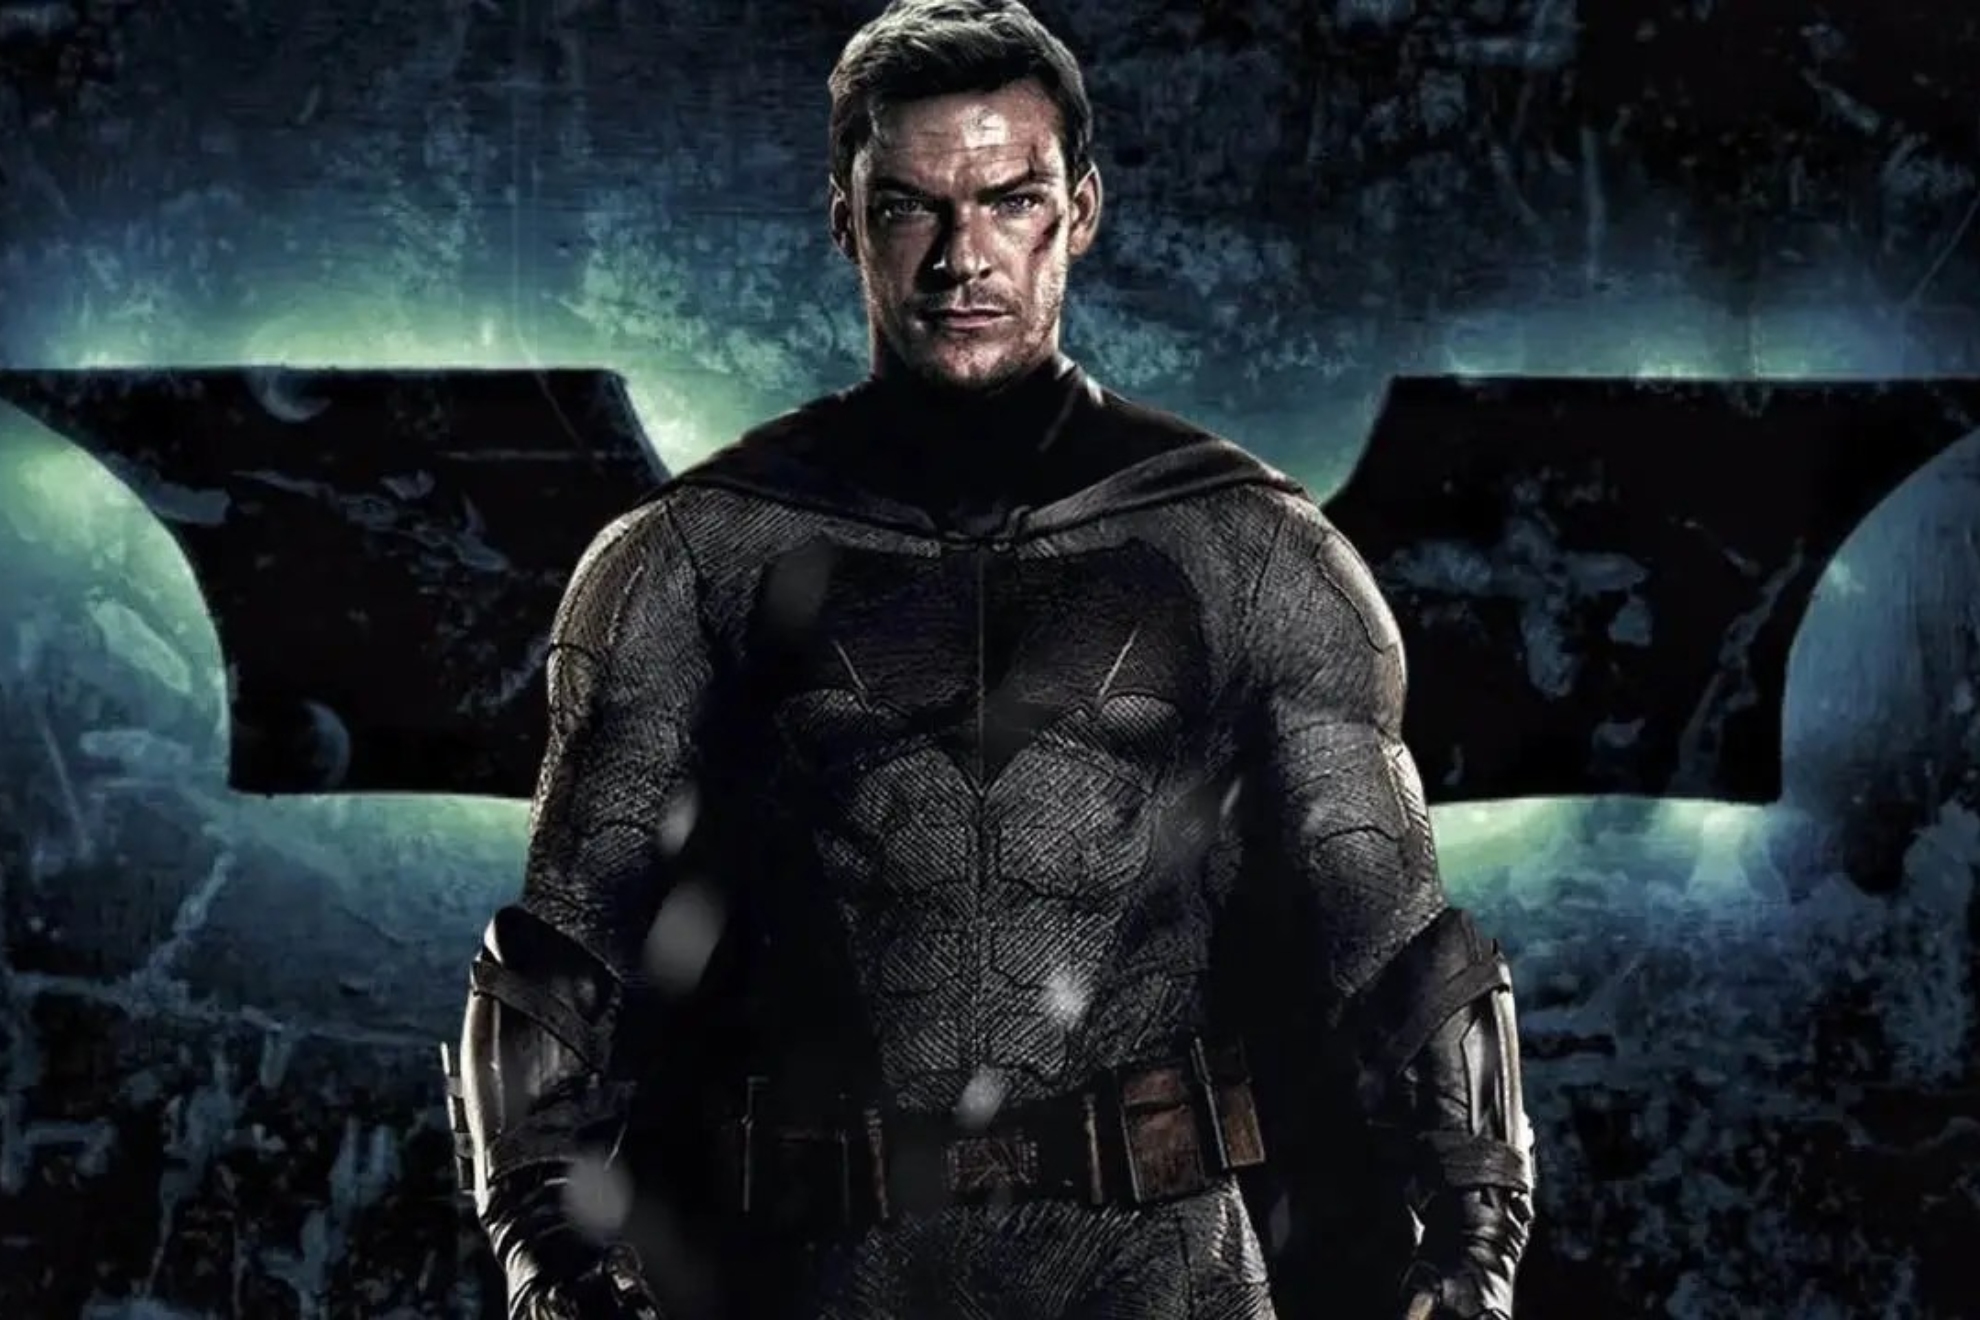 Doctored image of Alan Ritchson as Batman